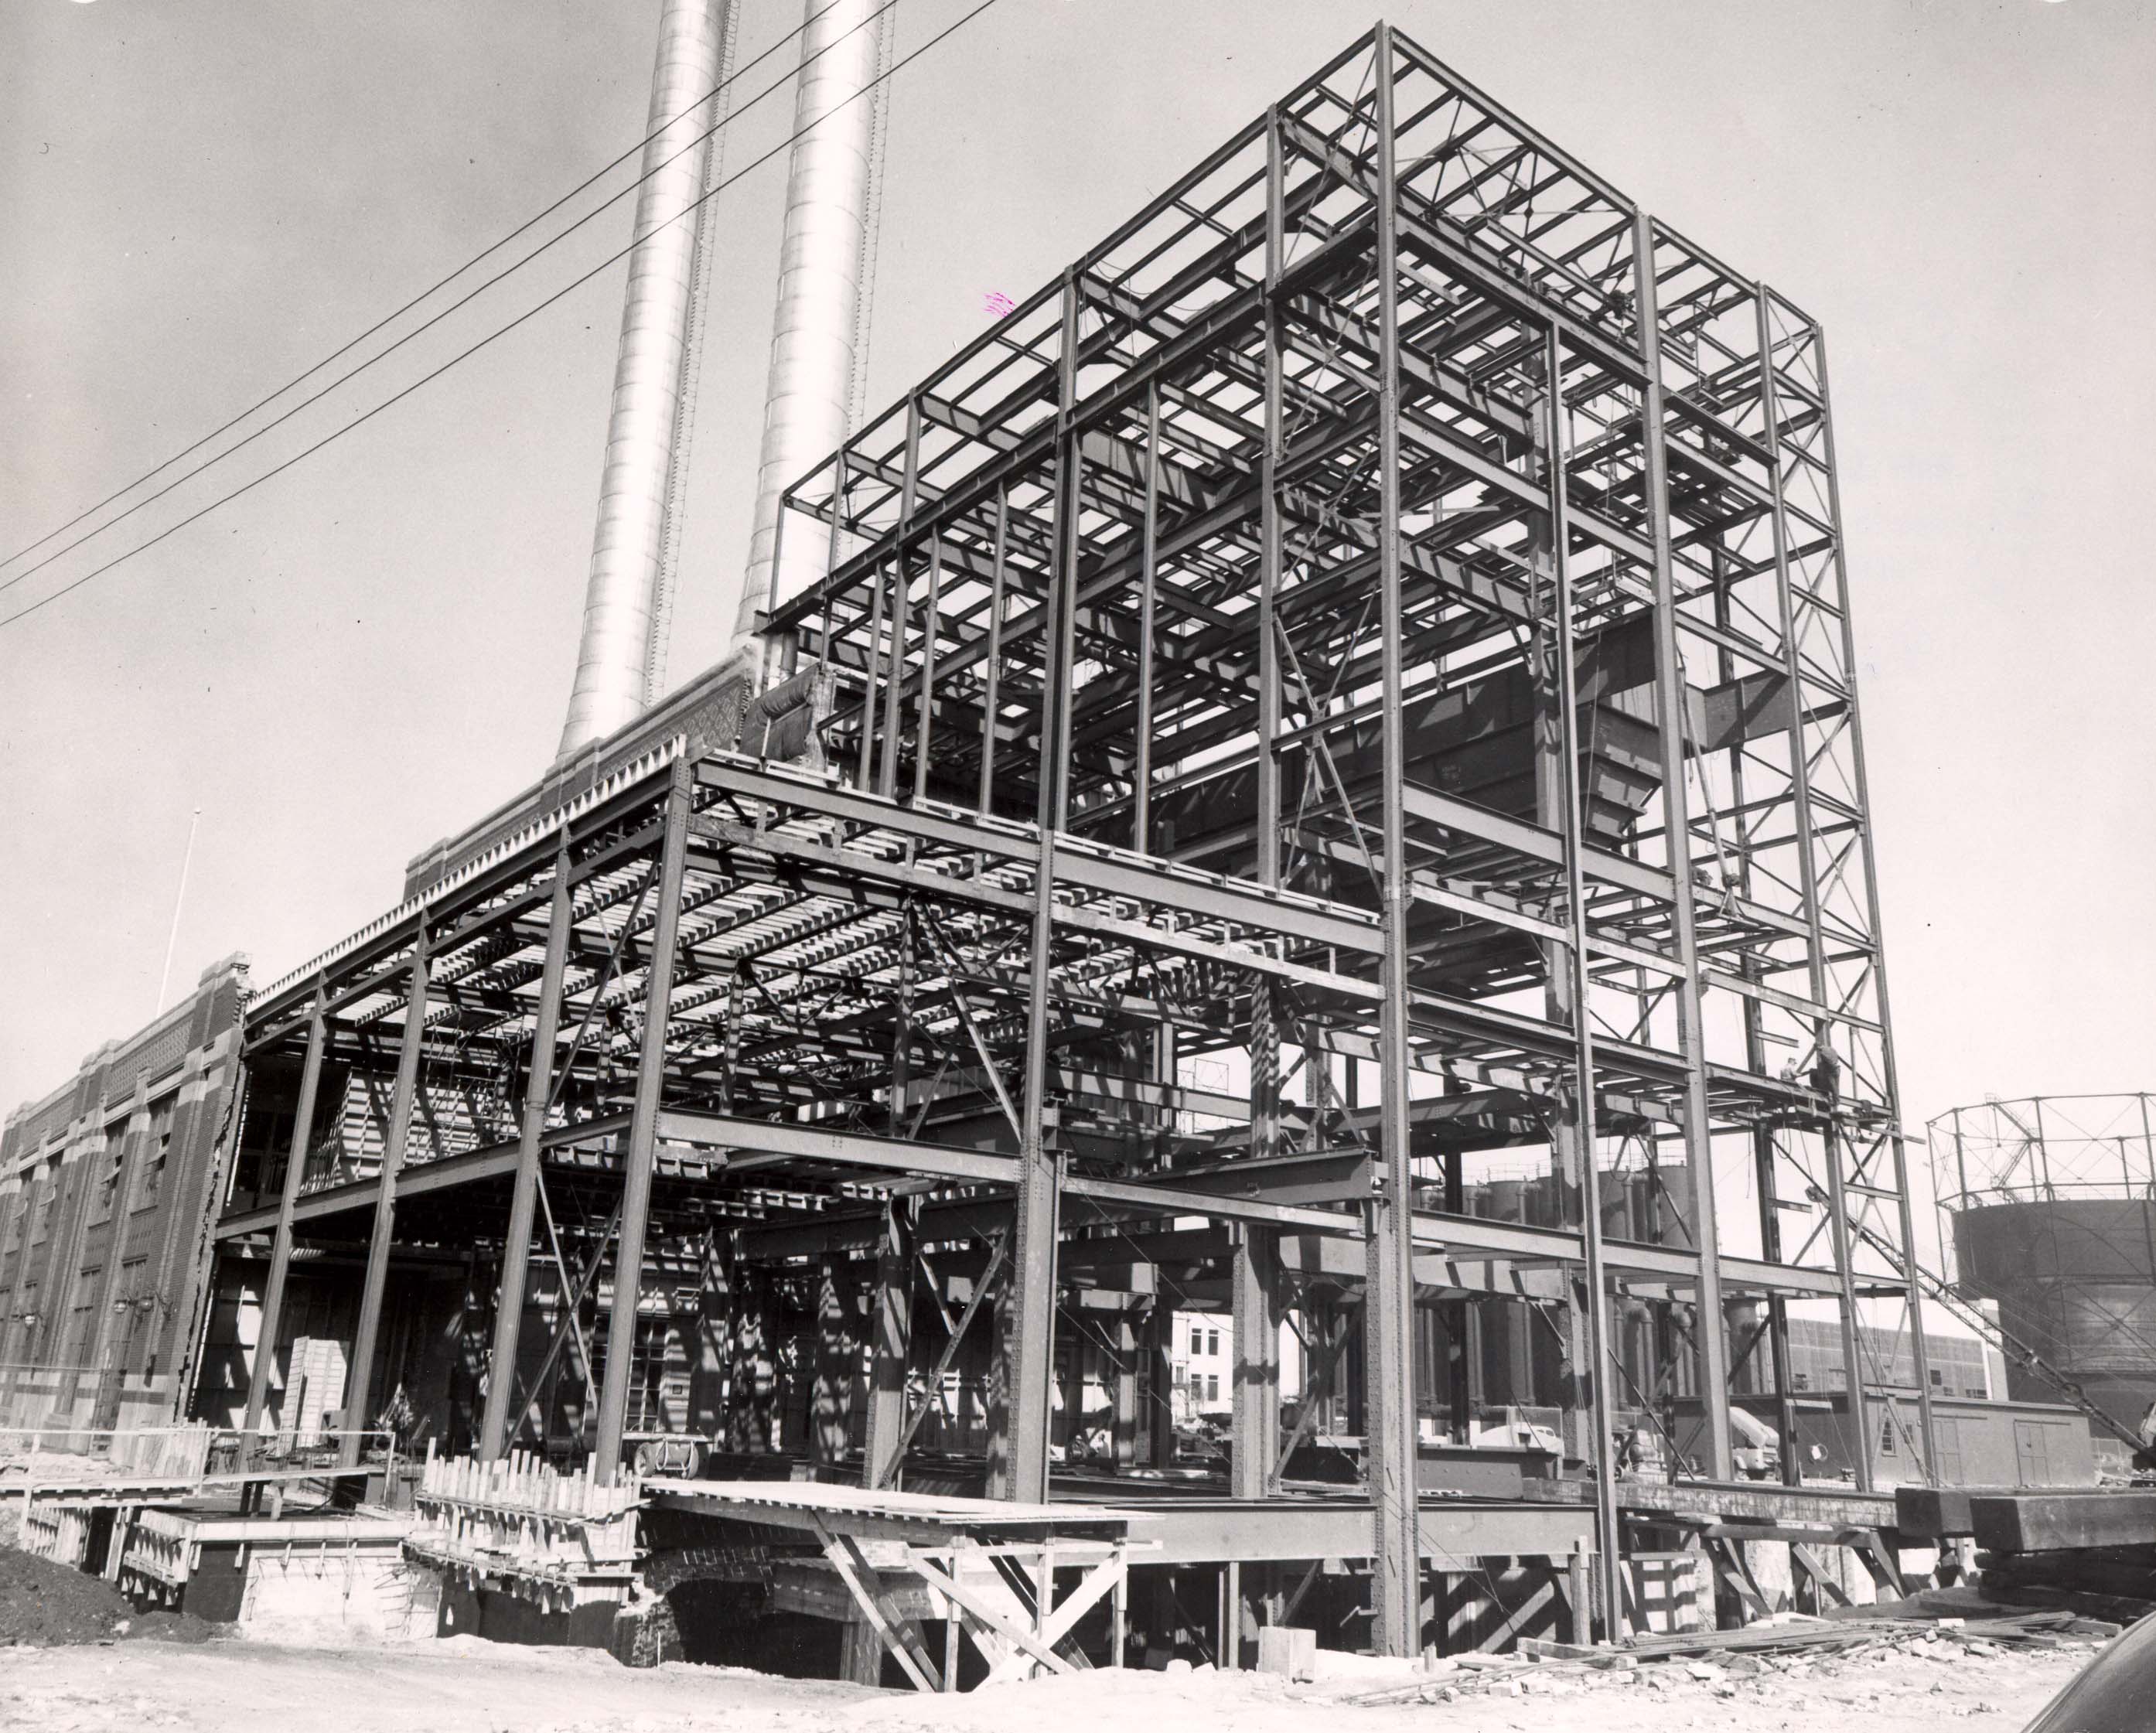 Photograph%20of%20construction%20at%20the%20Ford%20Power%20Plant%20addition%2C%20showing%20the%20complete%20skeletal%20frame%20of%20new%20section.